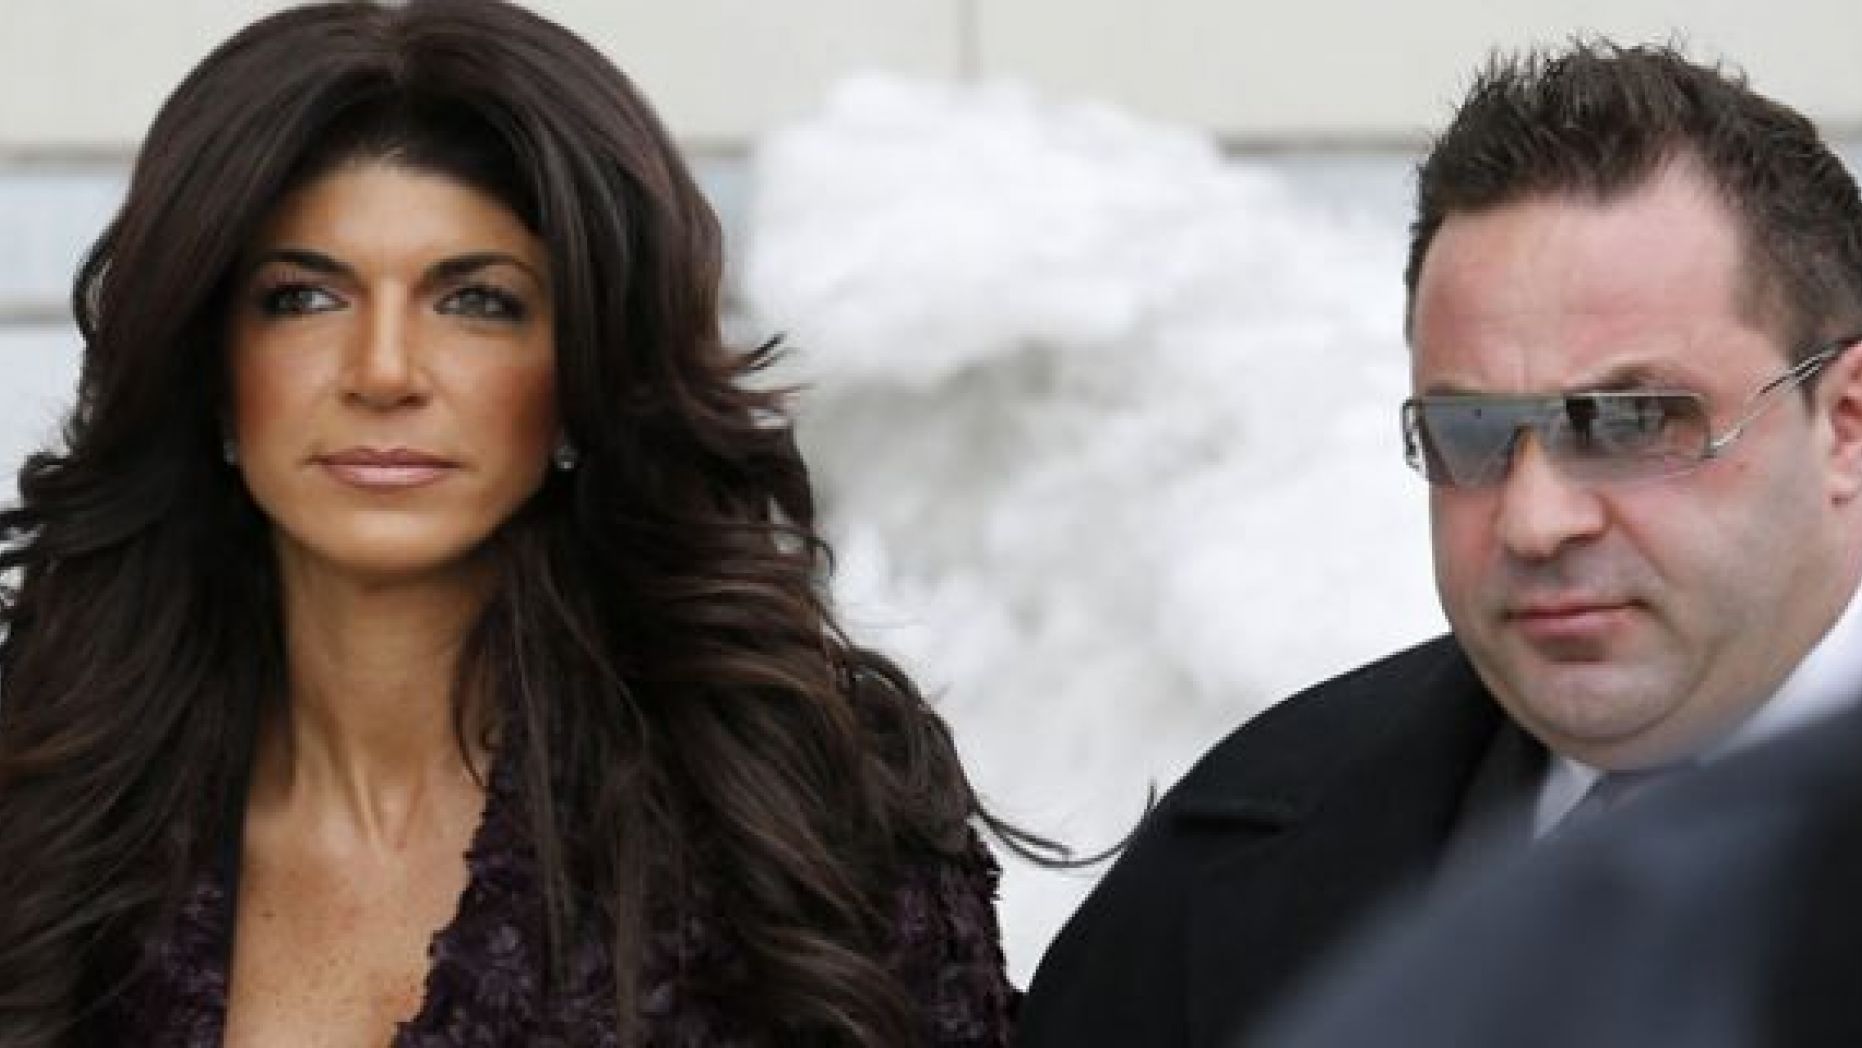 Teresa Giudice reacted to the news her husband, Joe, will be deported after he finishes his prison sentence.